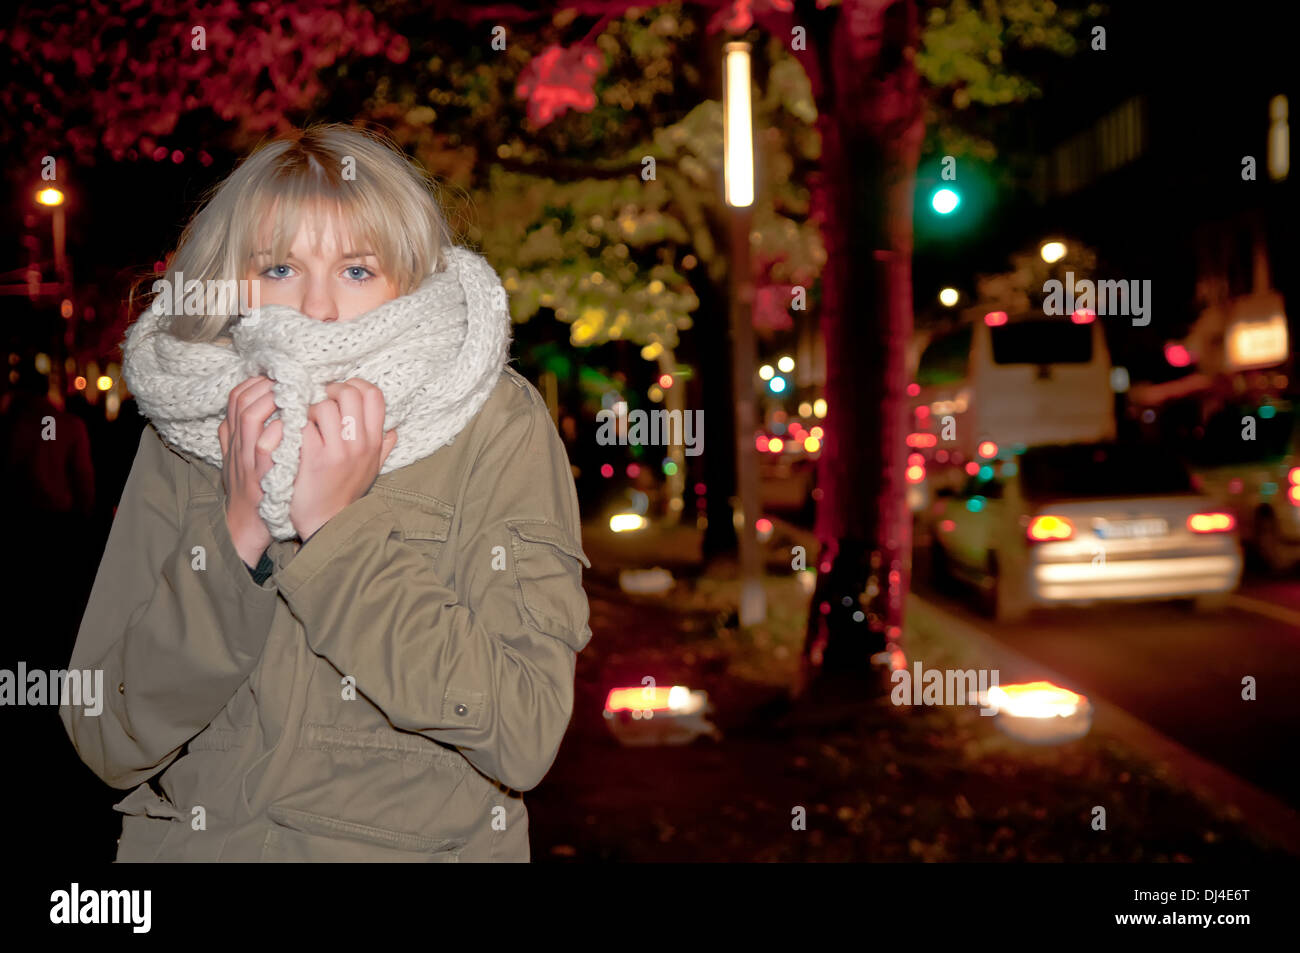 young woman freezes Stock Photo